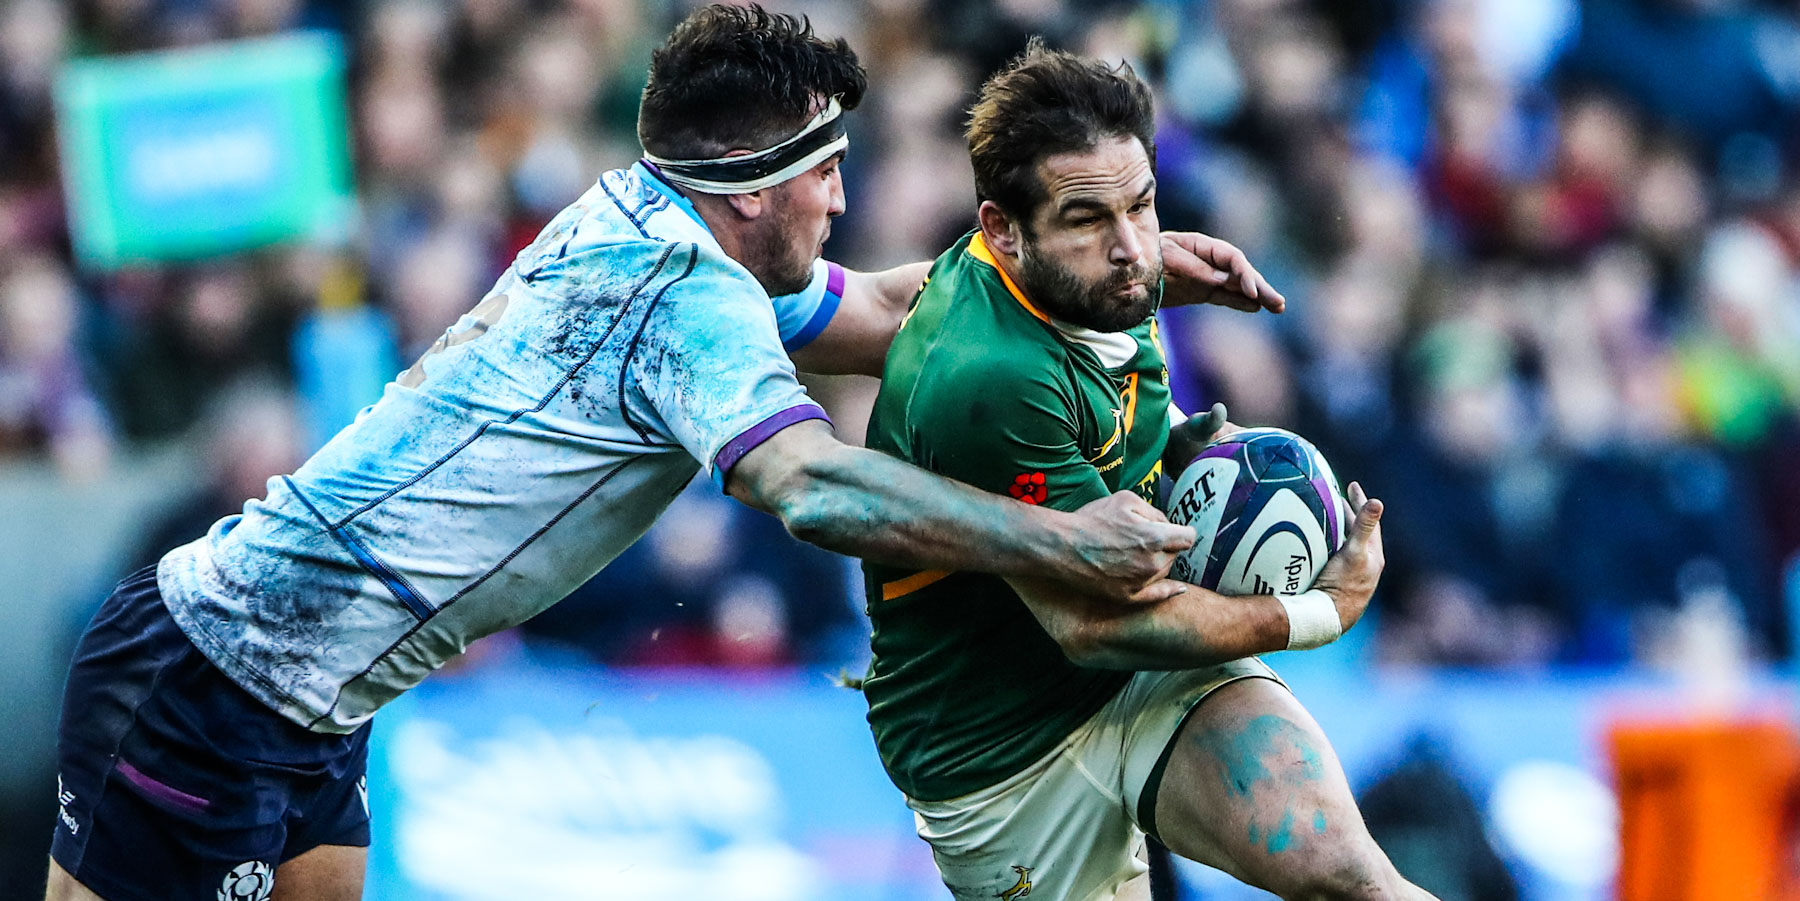 Cobus Reinach upped the pace when he came on in the second half.